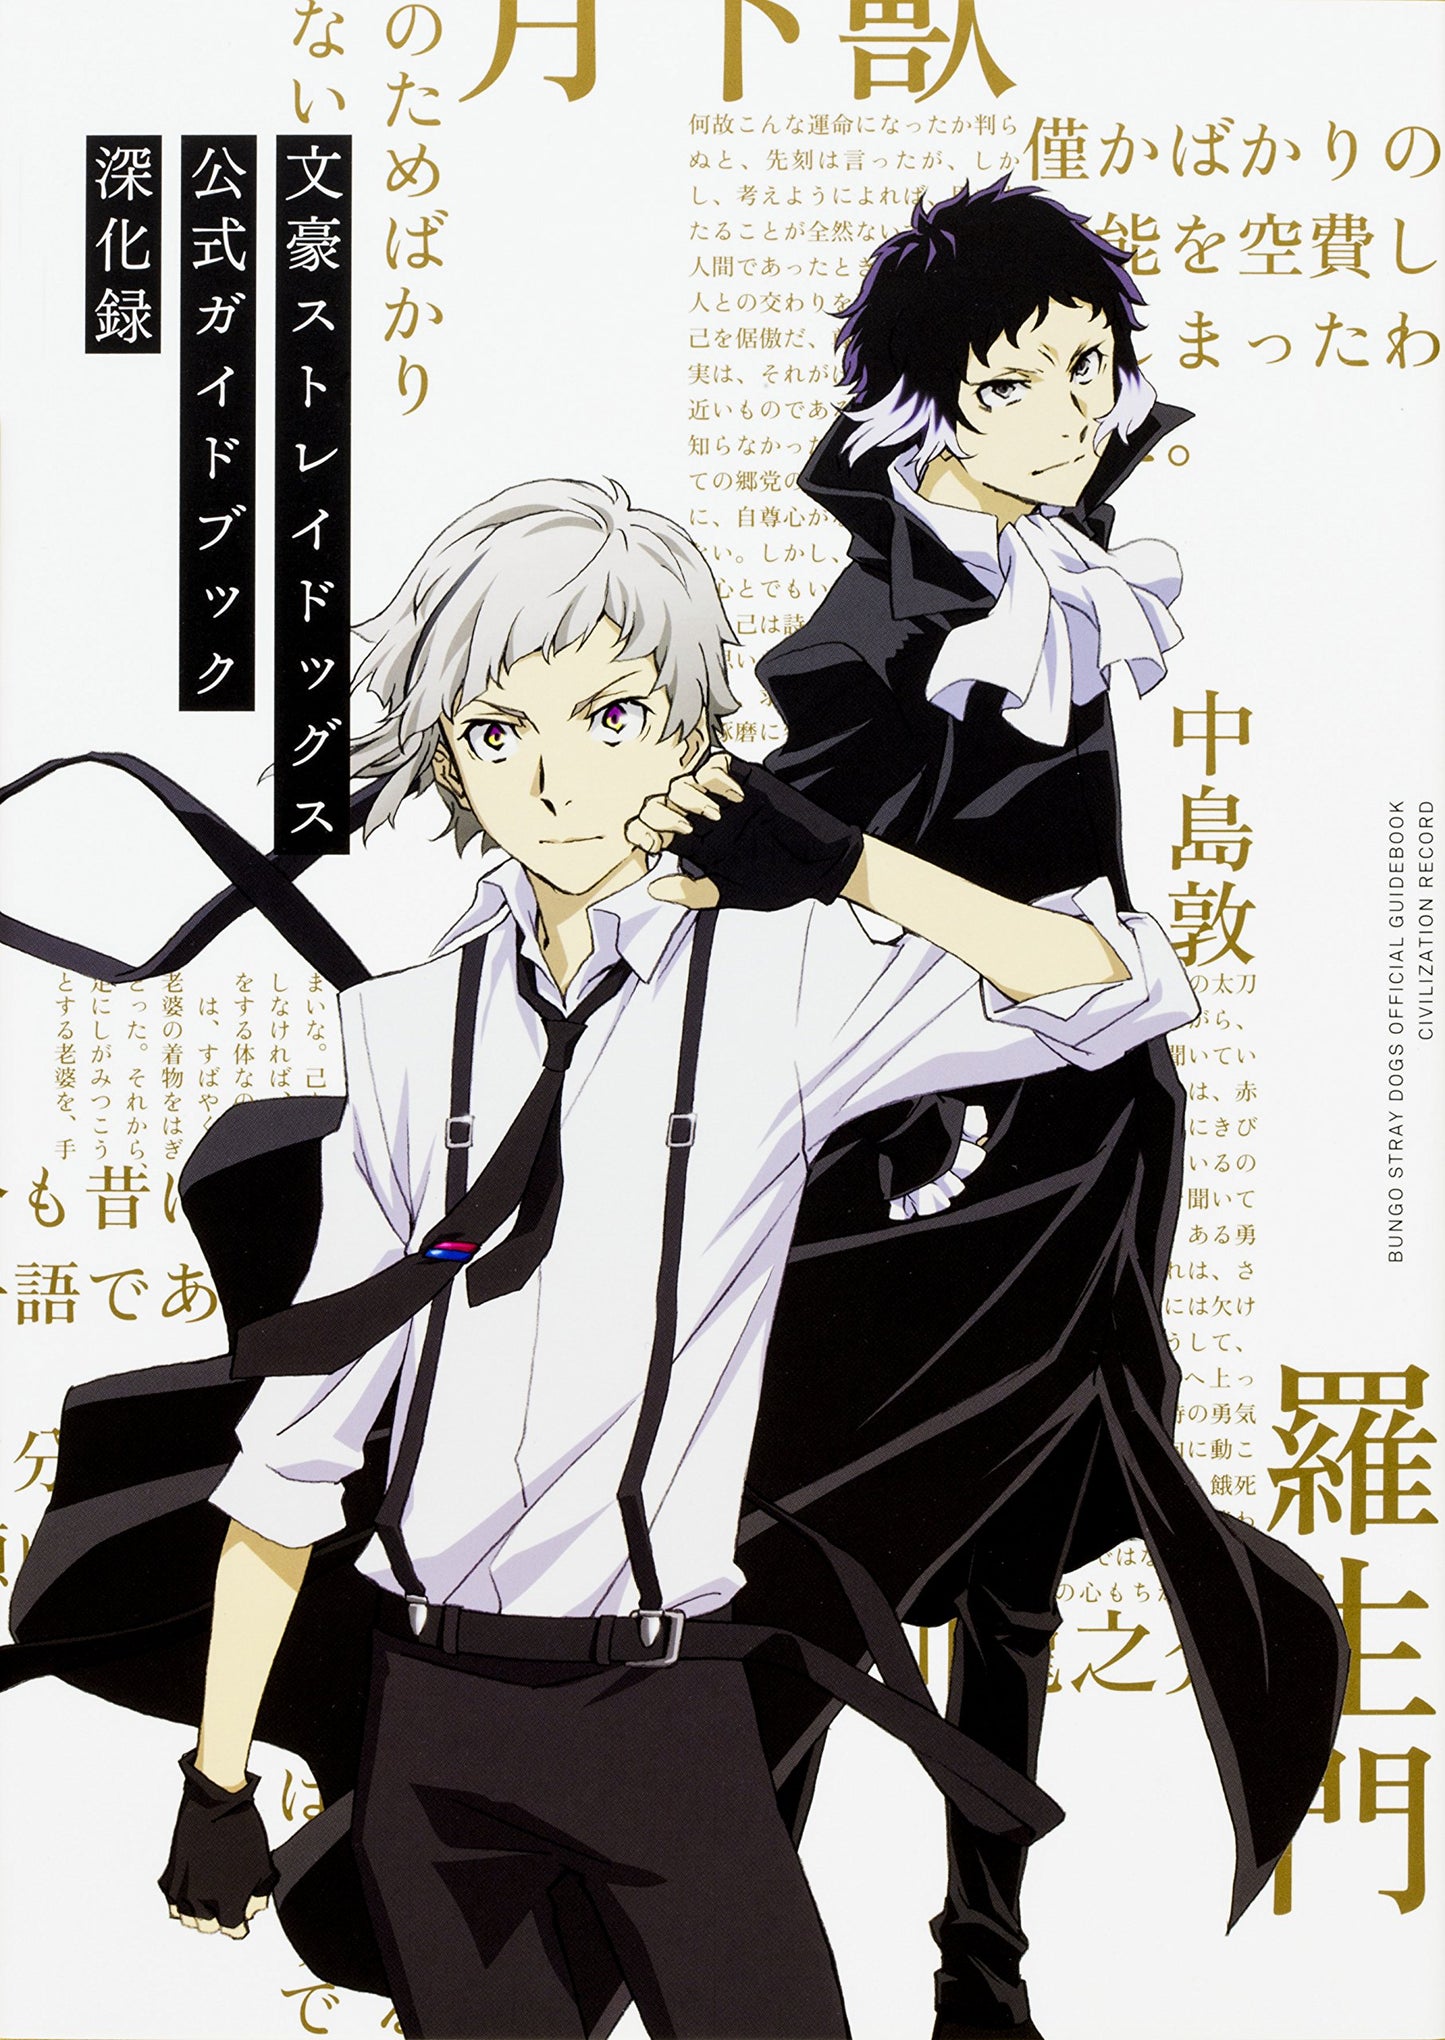 Bungo stray dogs - Officiel GuideBook  2 - Deepening Record